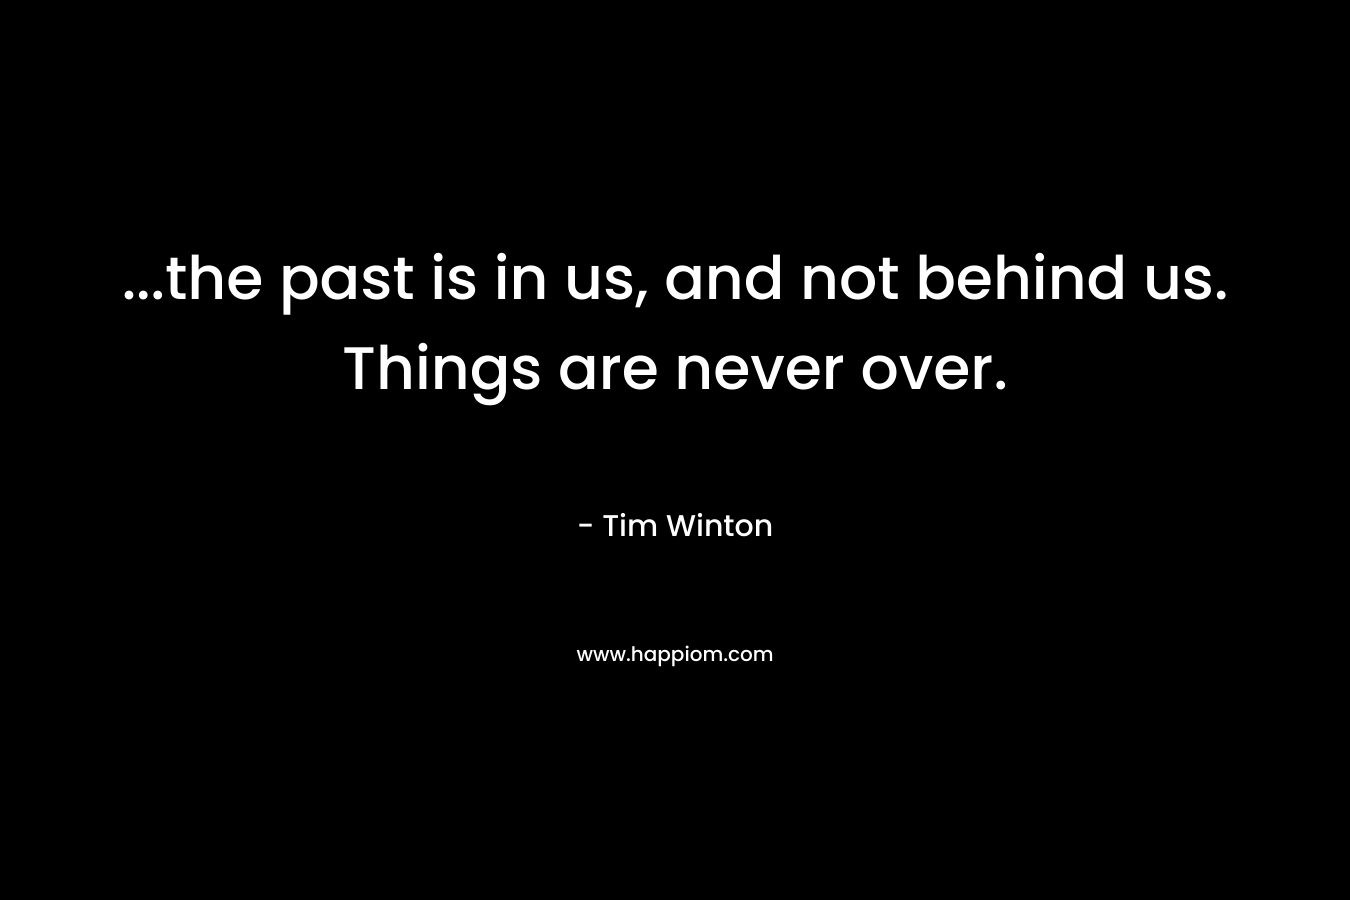 ...the past is in us, and not behind us. Things are never over.